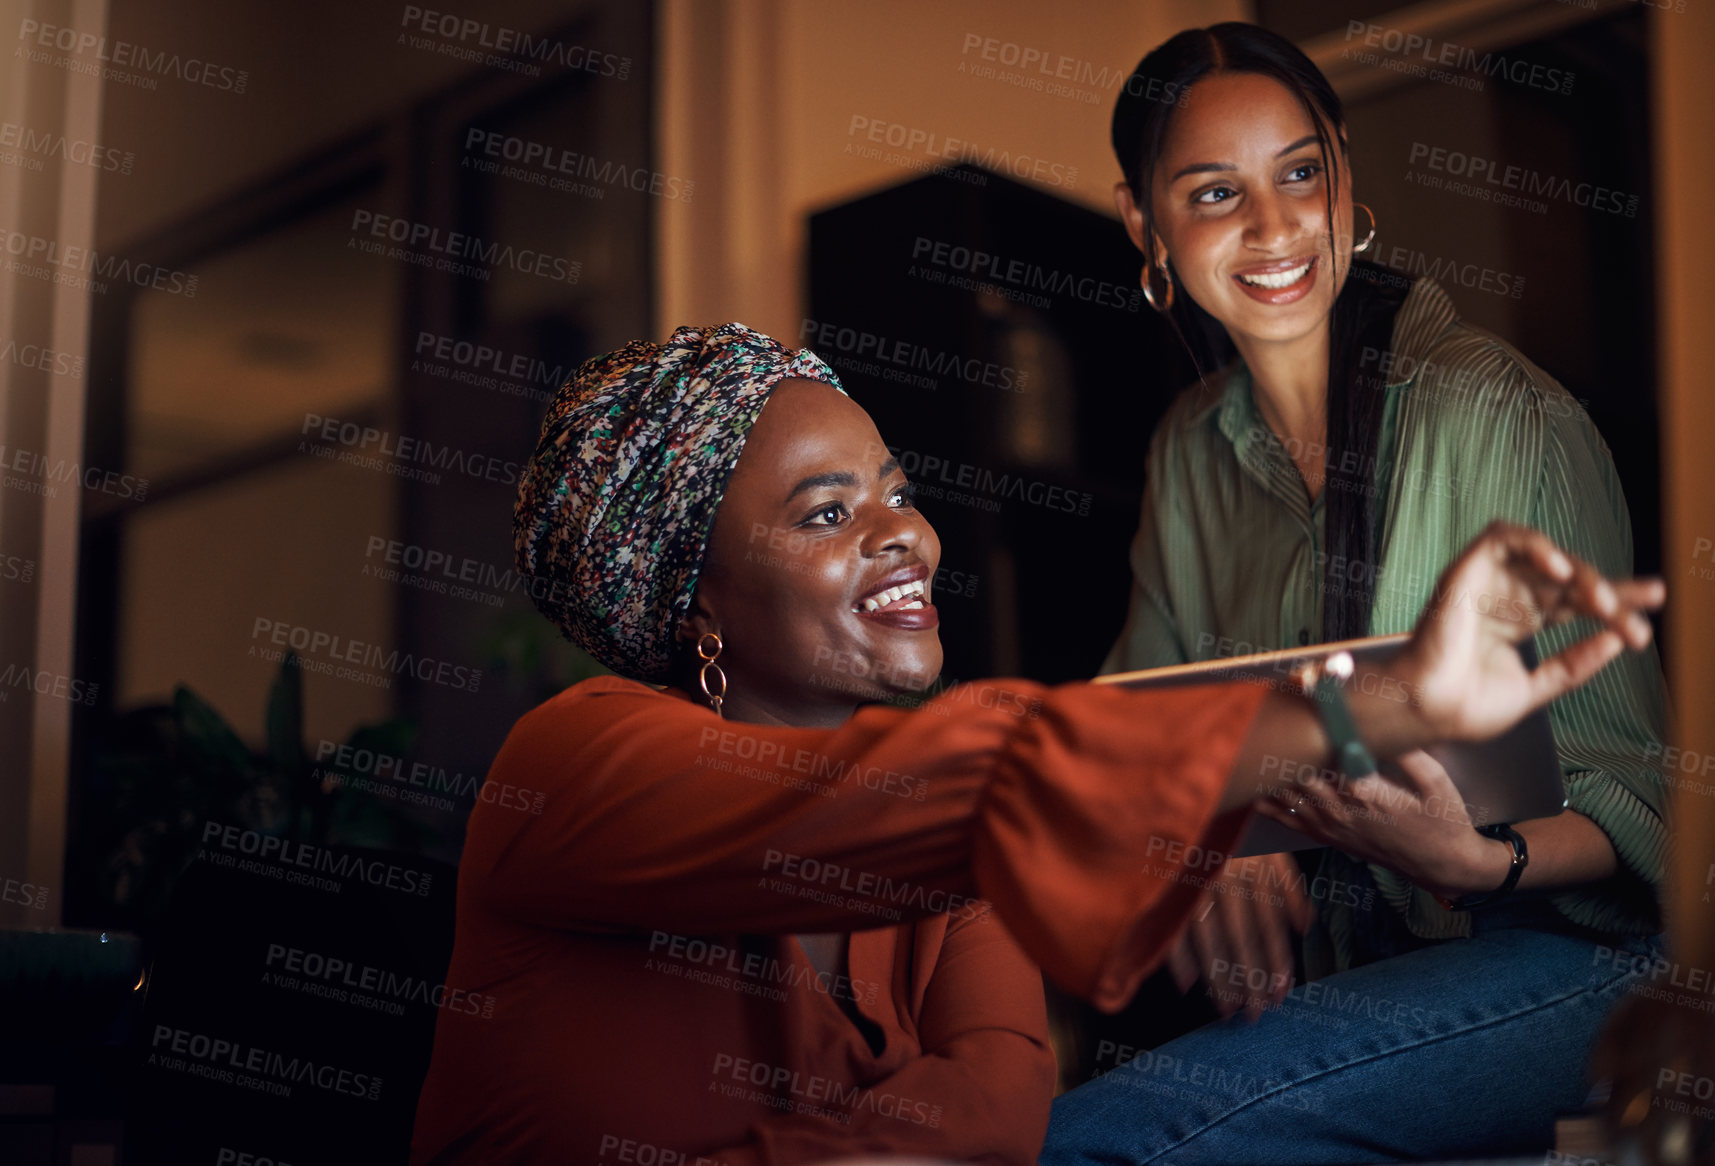 Buy stock photo Shot of two businesswomen working together on a computer in an office at night